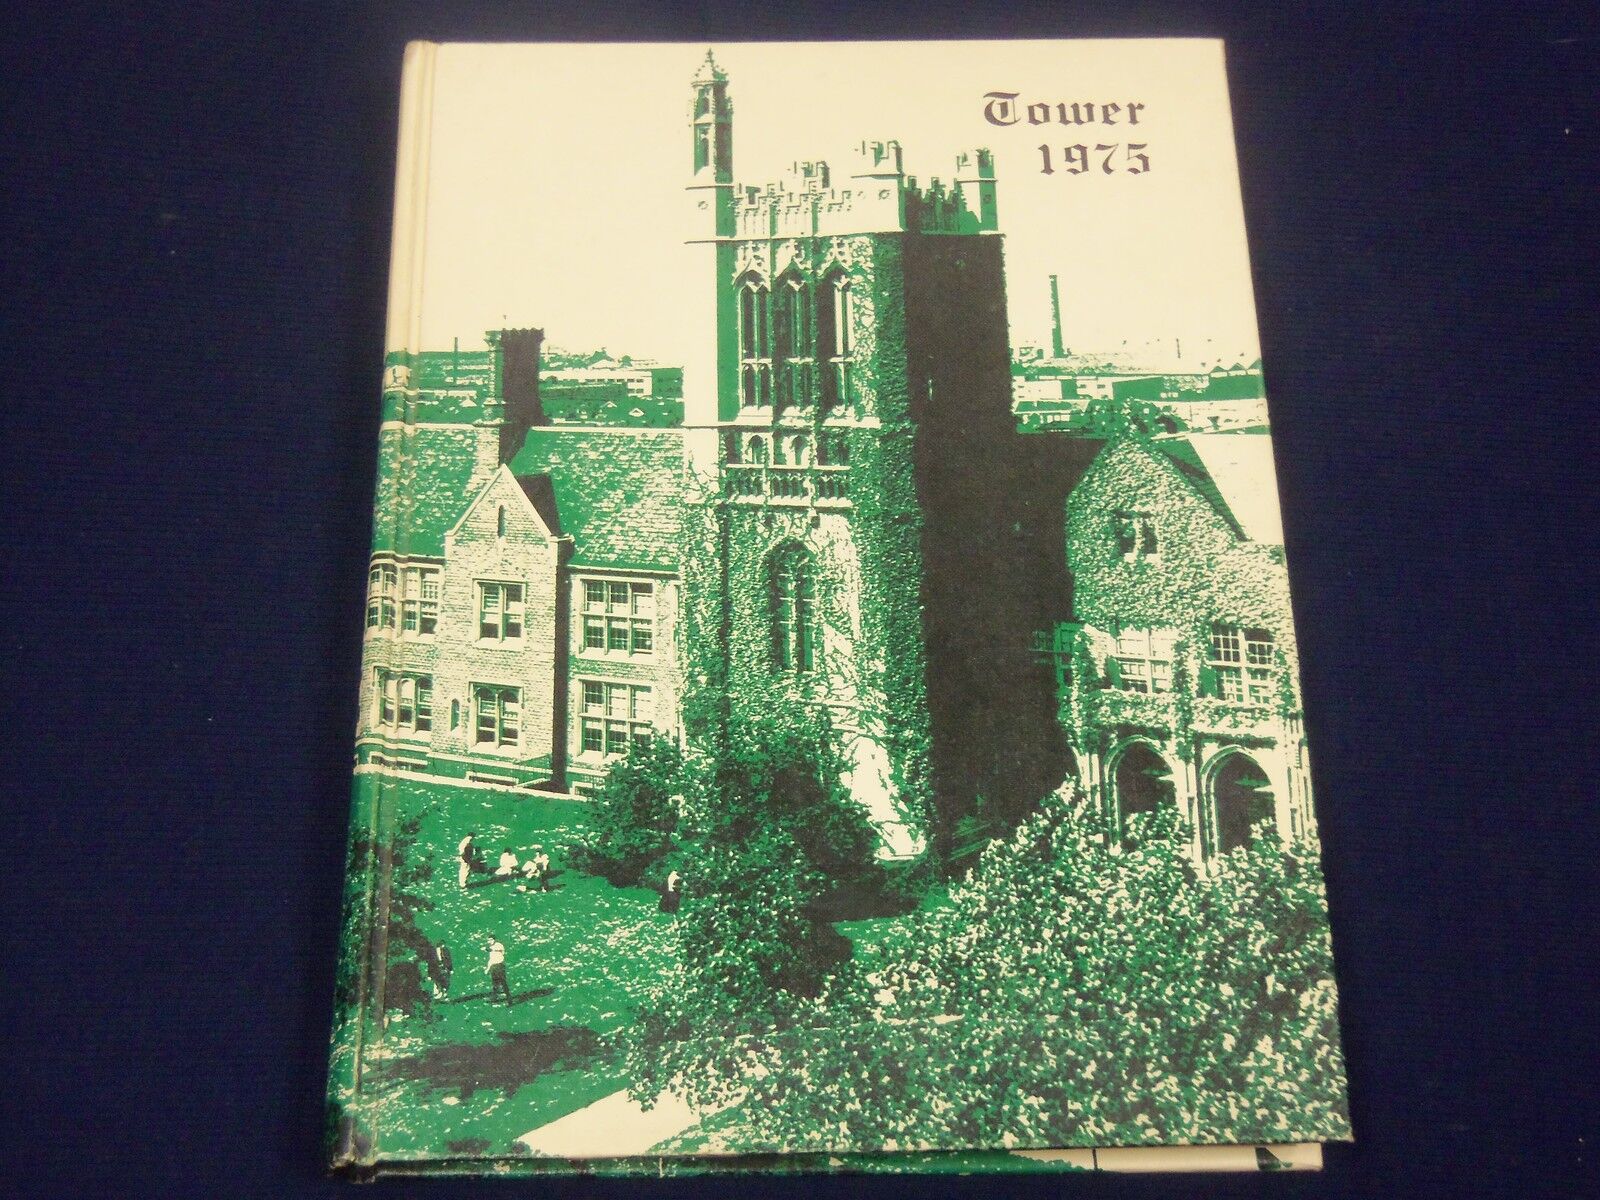 1975 JERSEY CITY STATE COLLEGE YEARBOOK - THE TOWER - GREAT PHOTOS - K 70